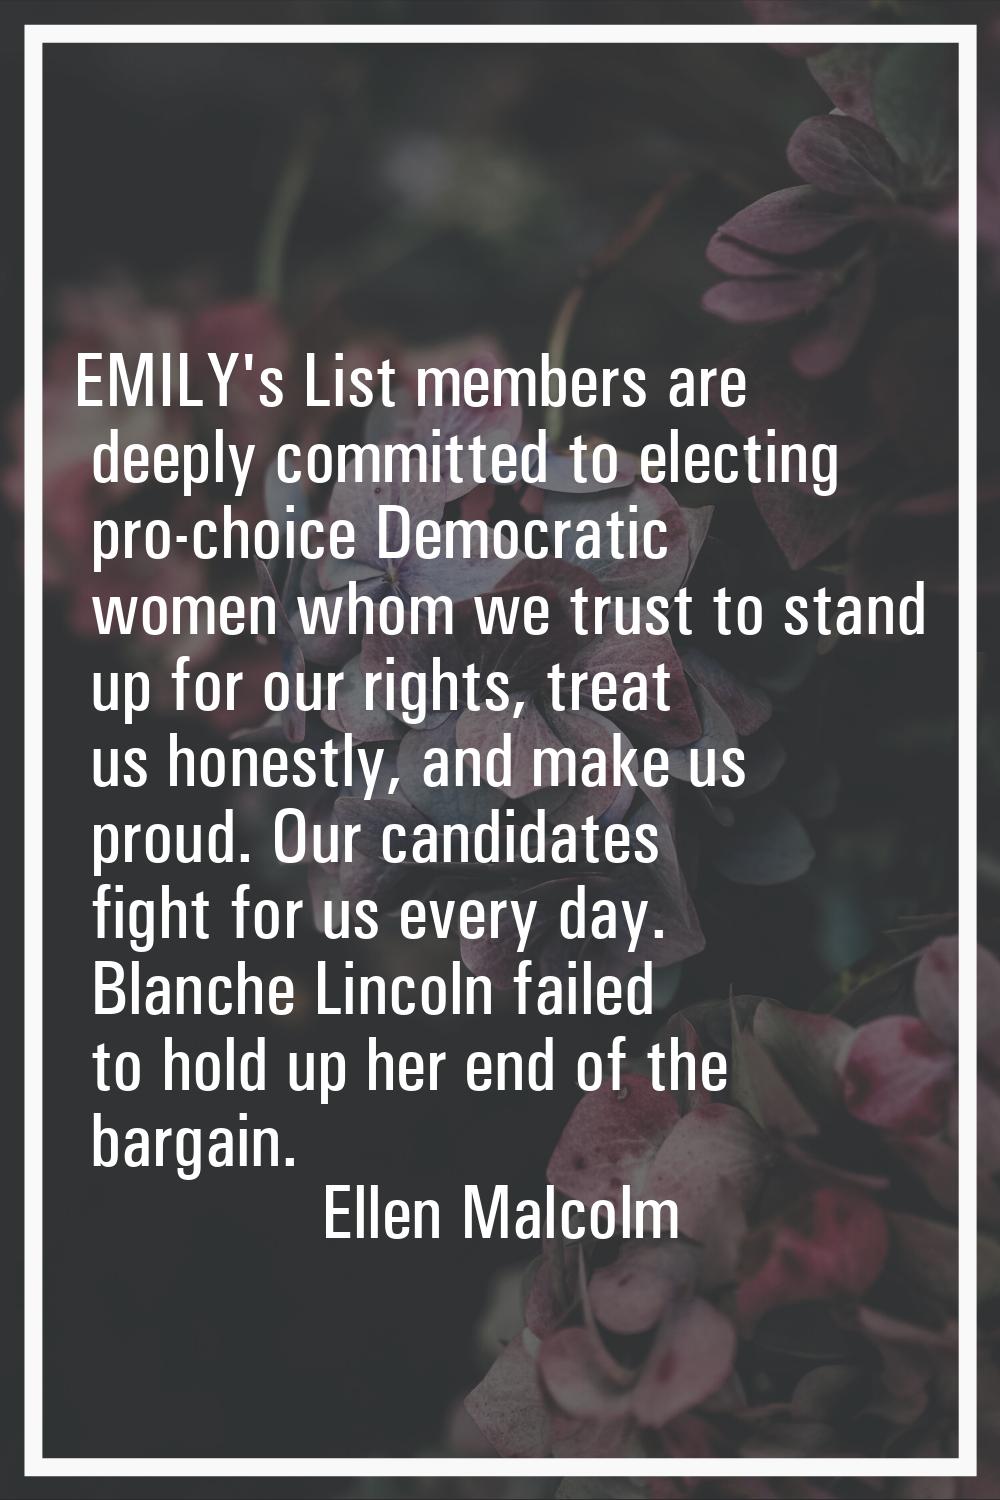 EMILY's List members are deeply committed to electing pro-choice Democratic women whom we trust to 